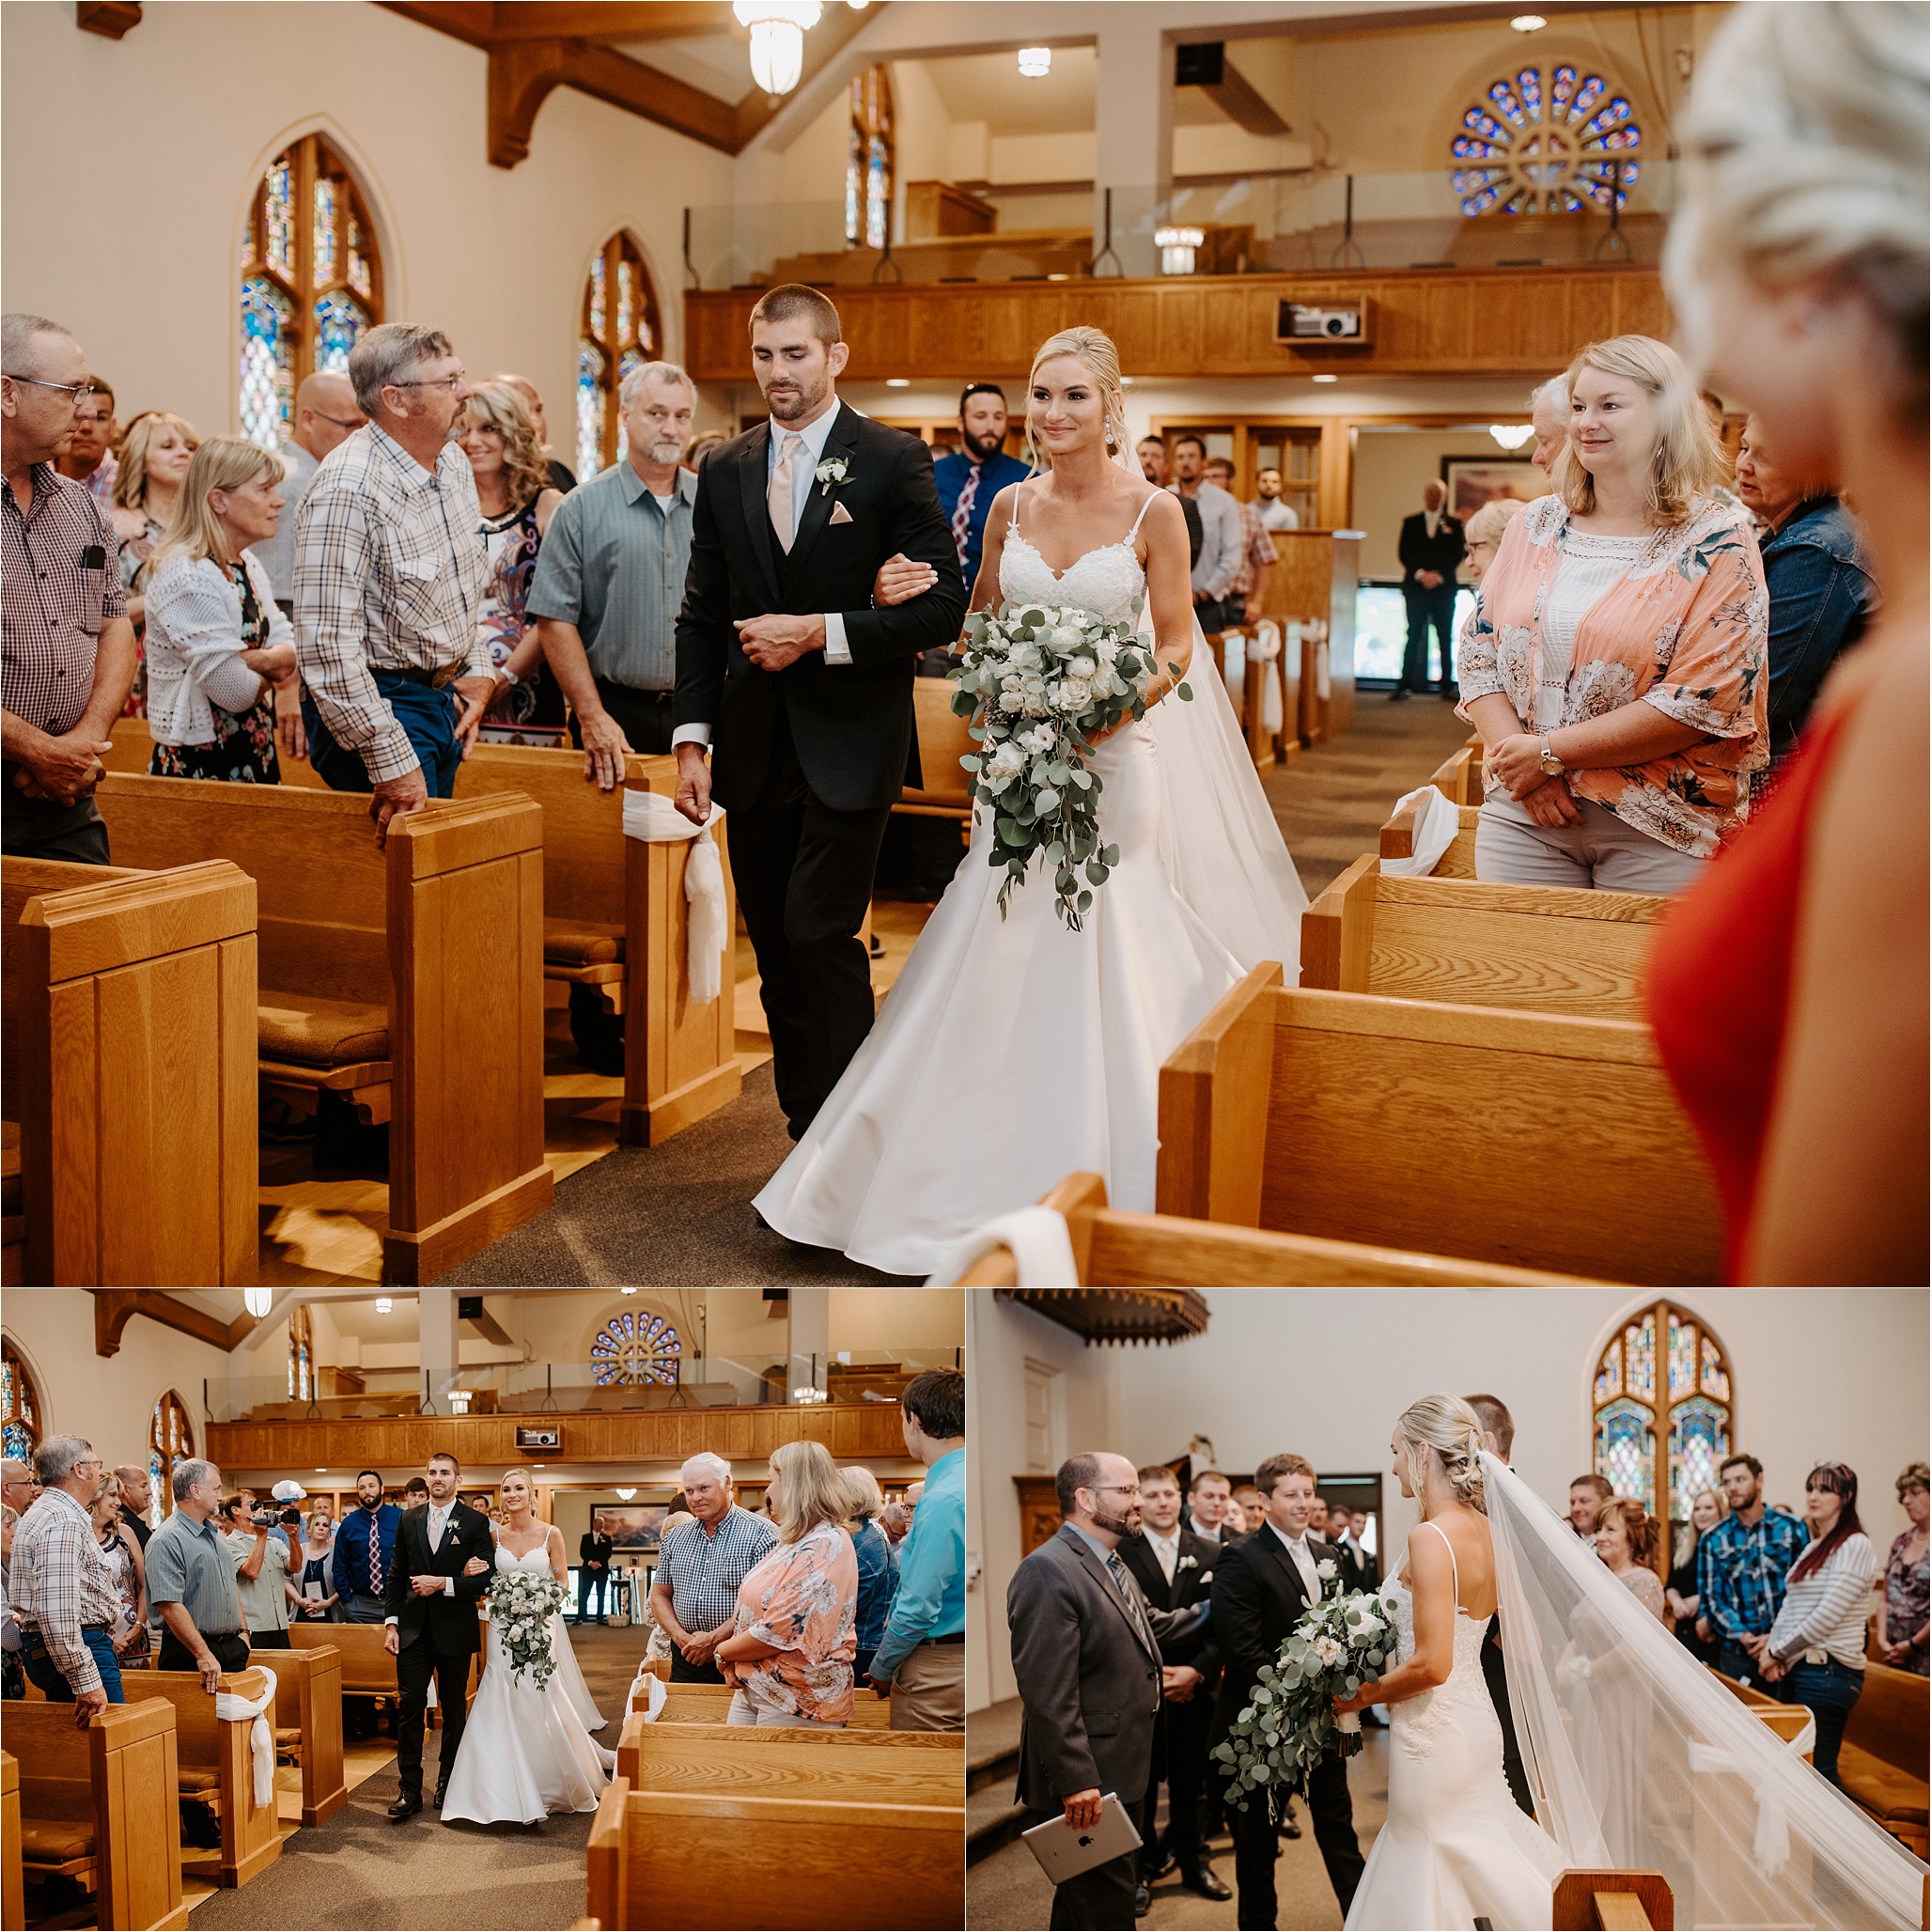 Summer Wedding Day at Millers Farm Barn in Central Illinois. Krystal Richmond Photography